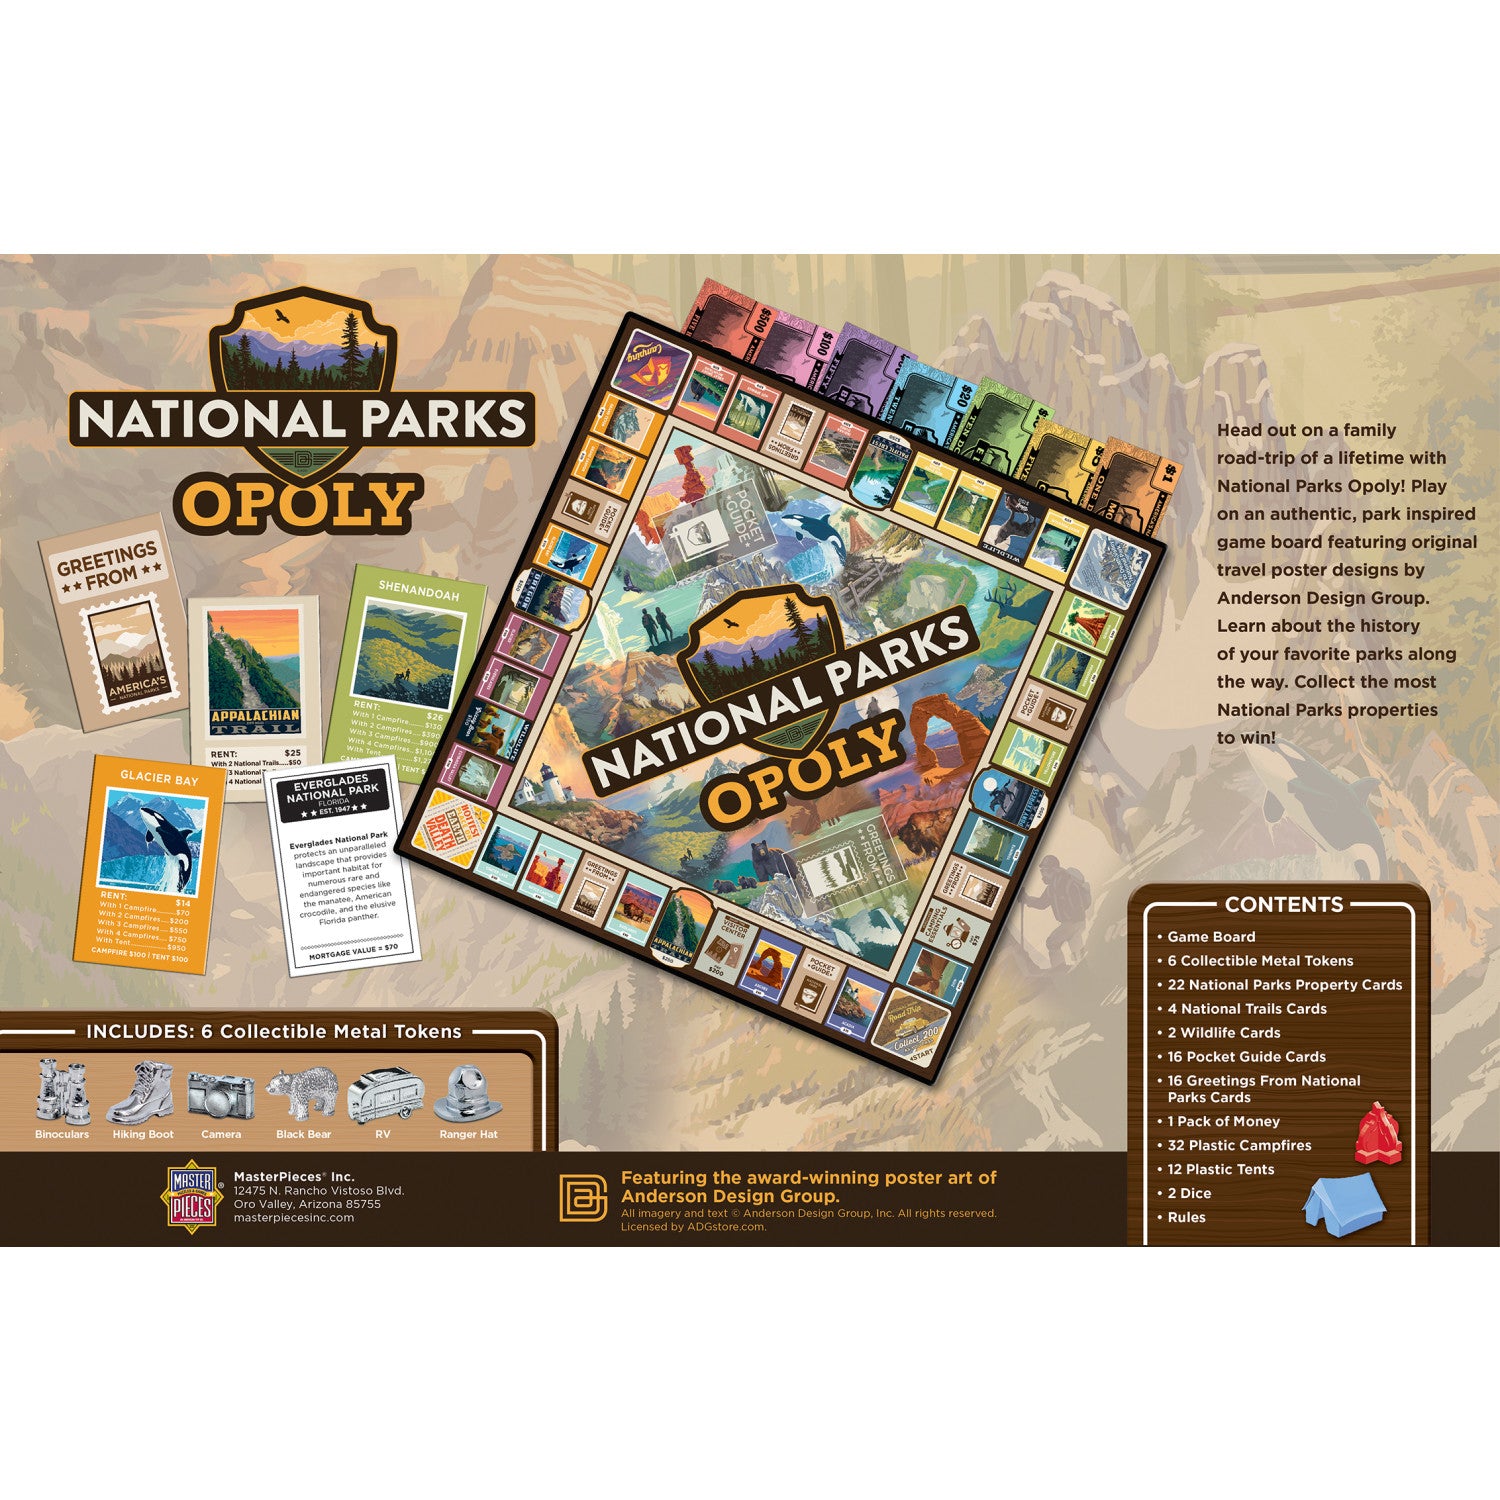 National Parks Opoly